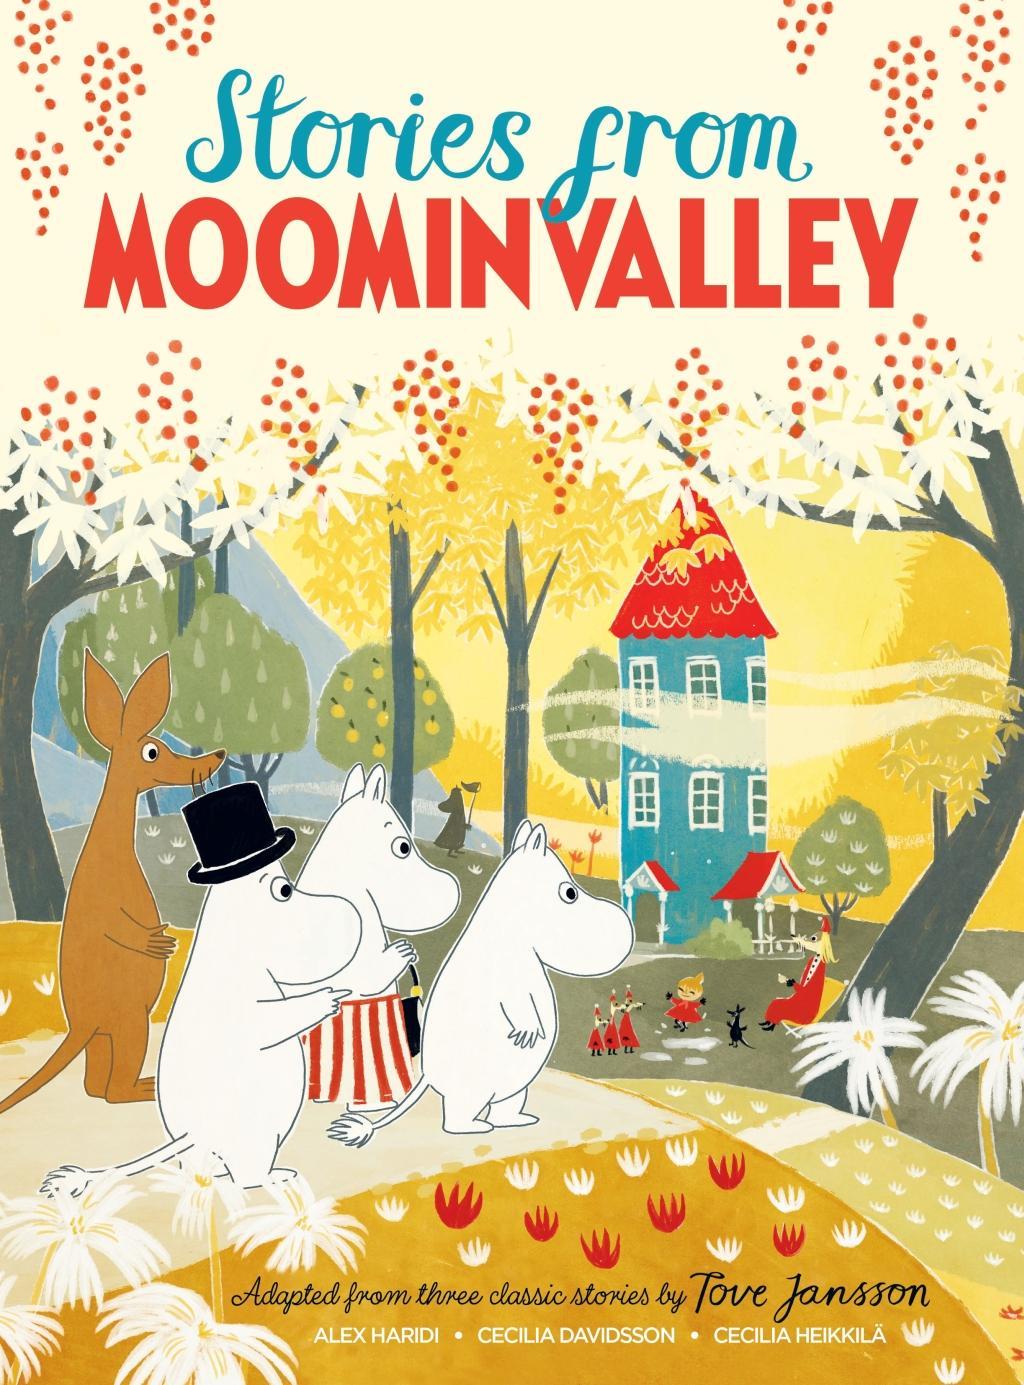 Book Stories from Moominvalley Tove Jansson